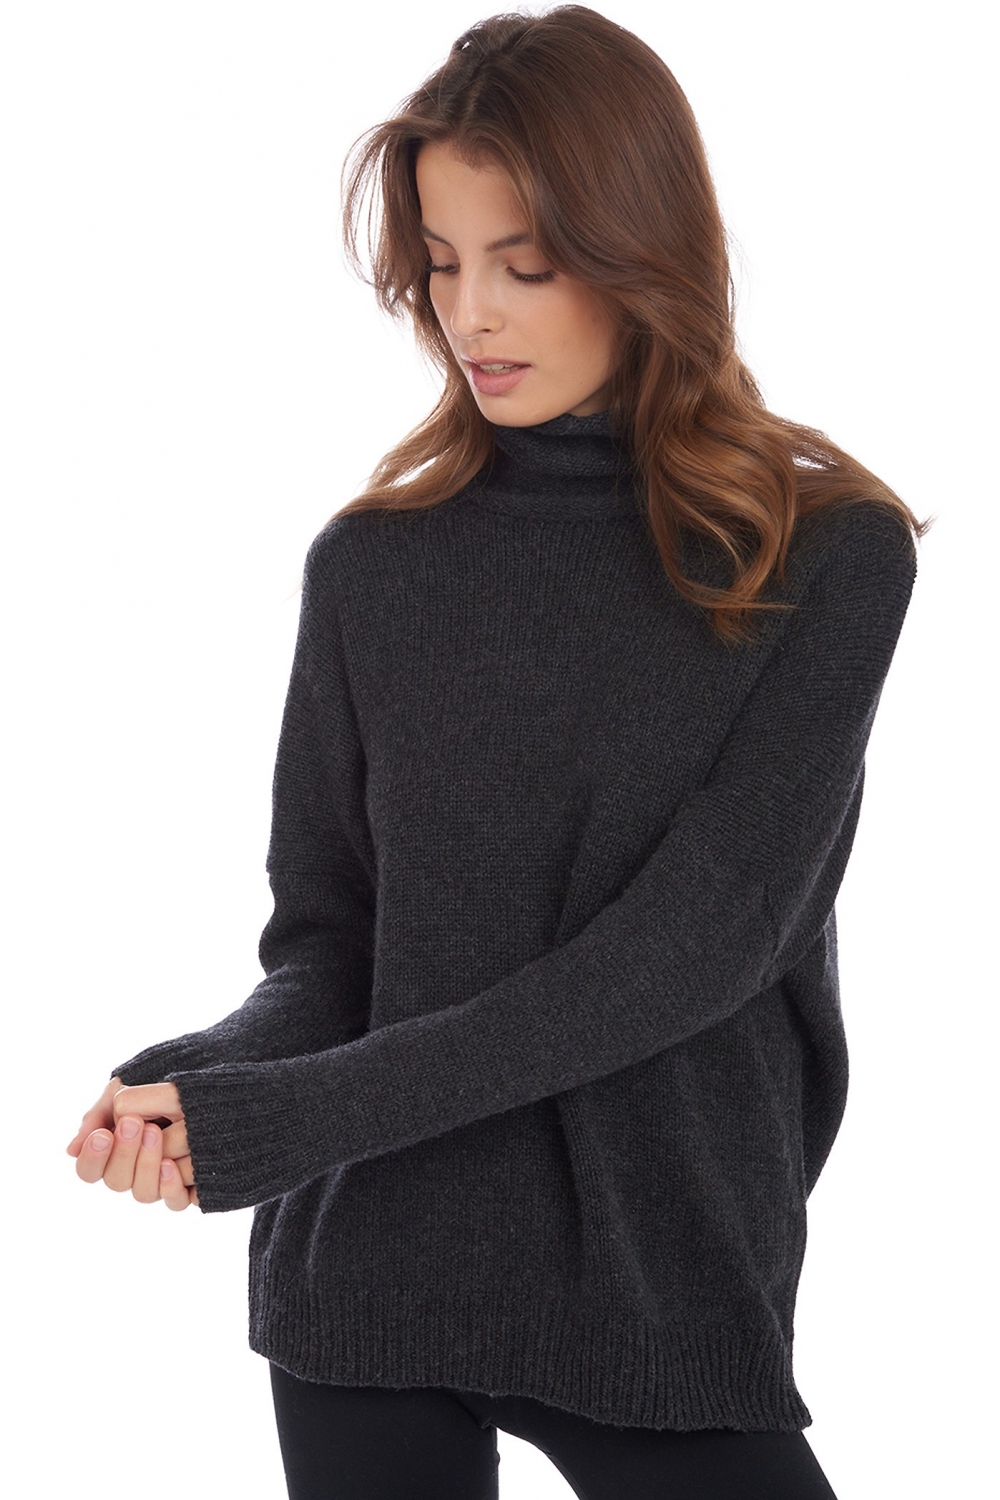 Chameau pull femme col roule agra anthracite l